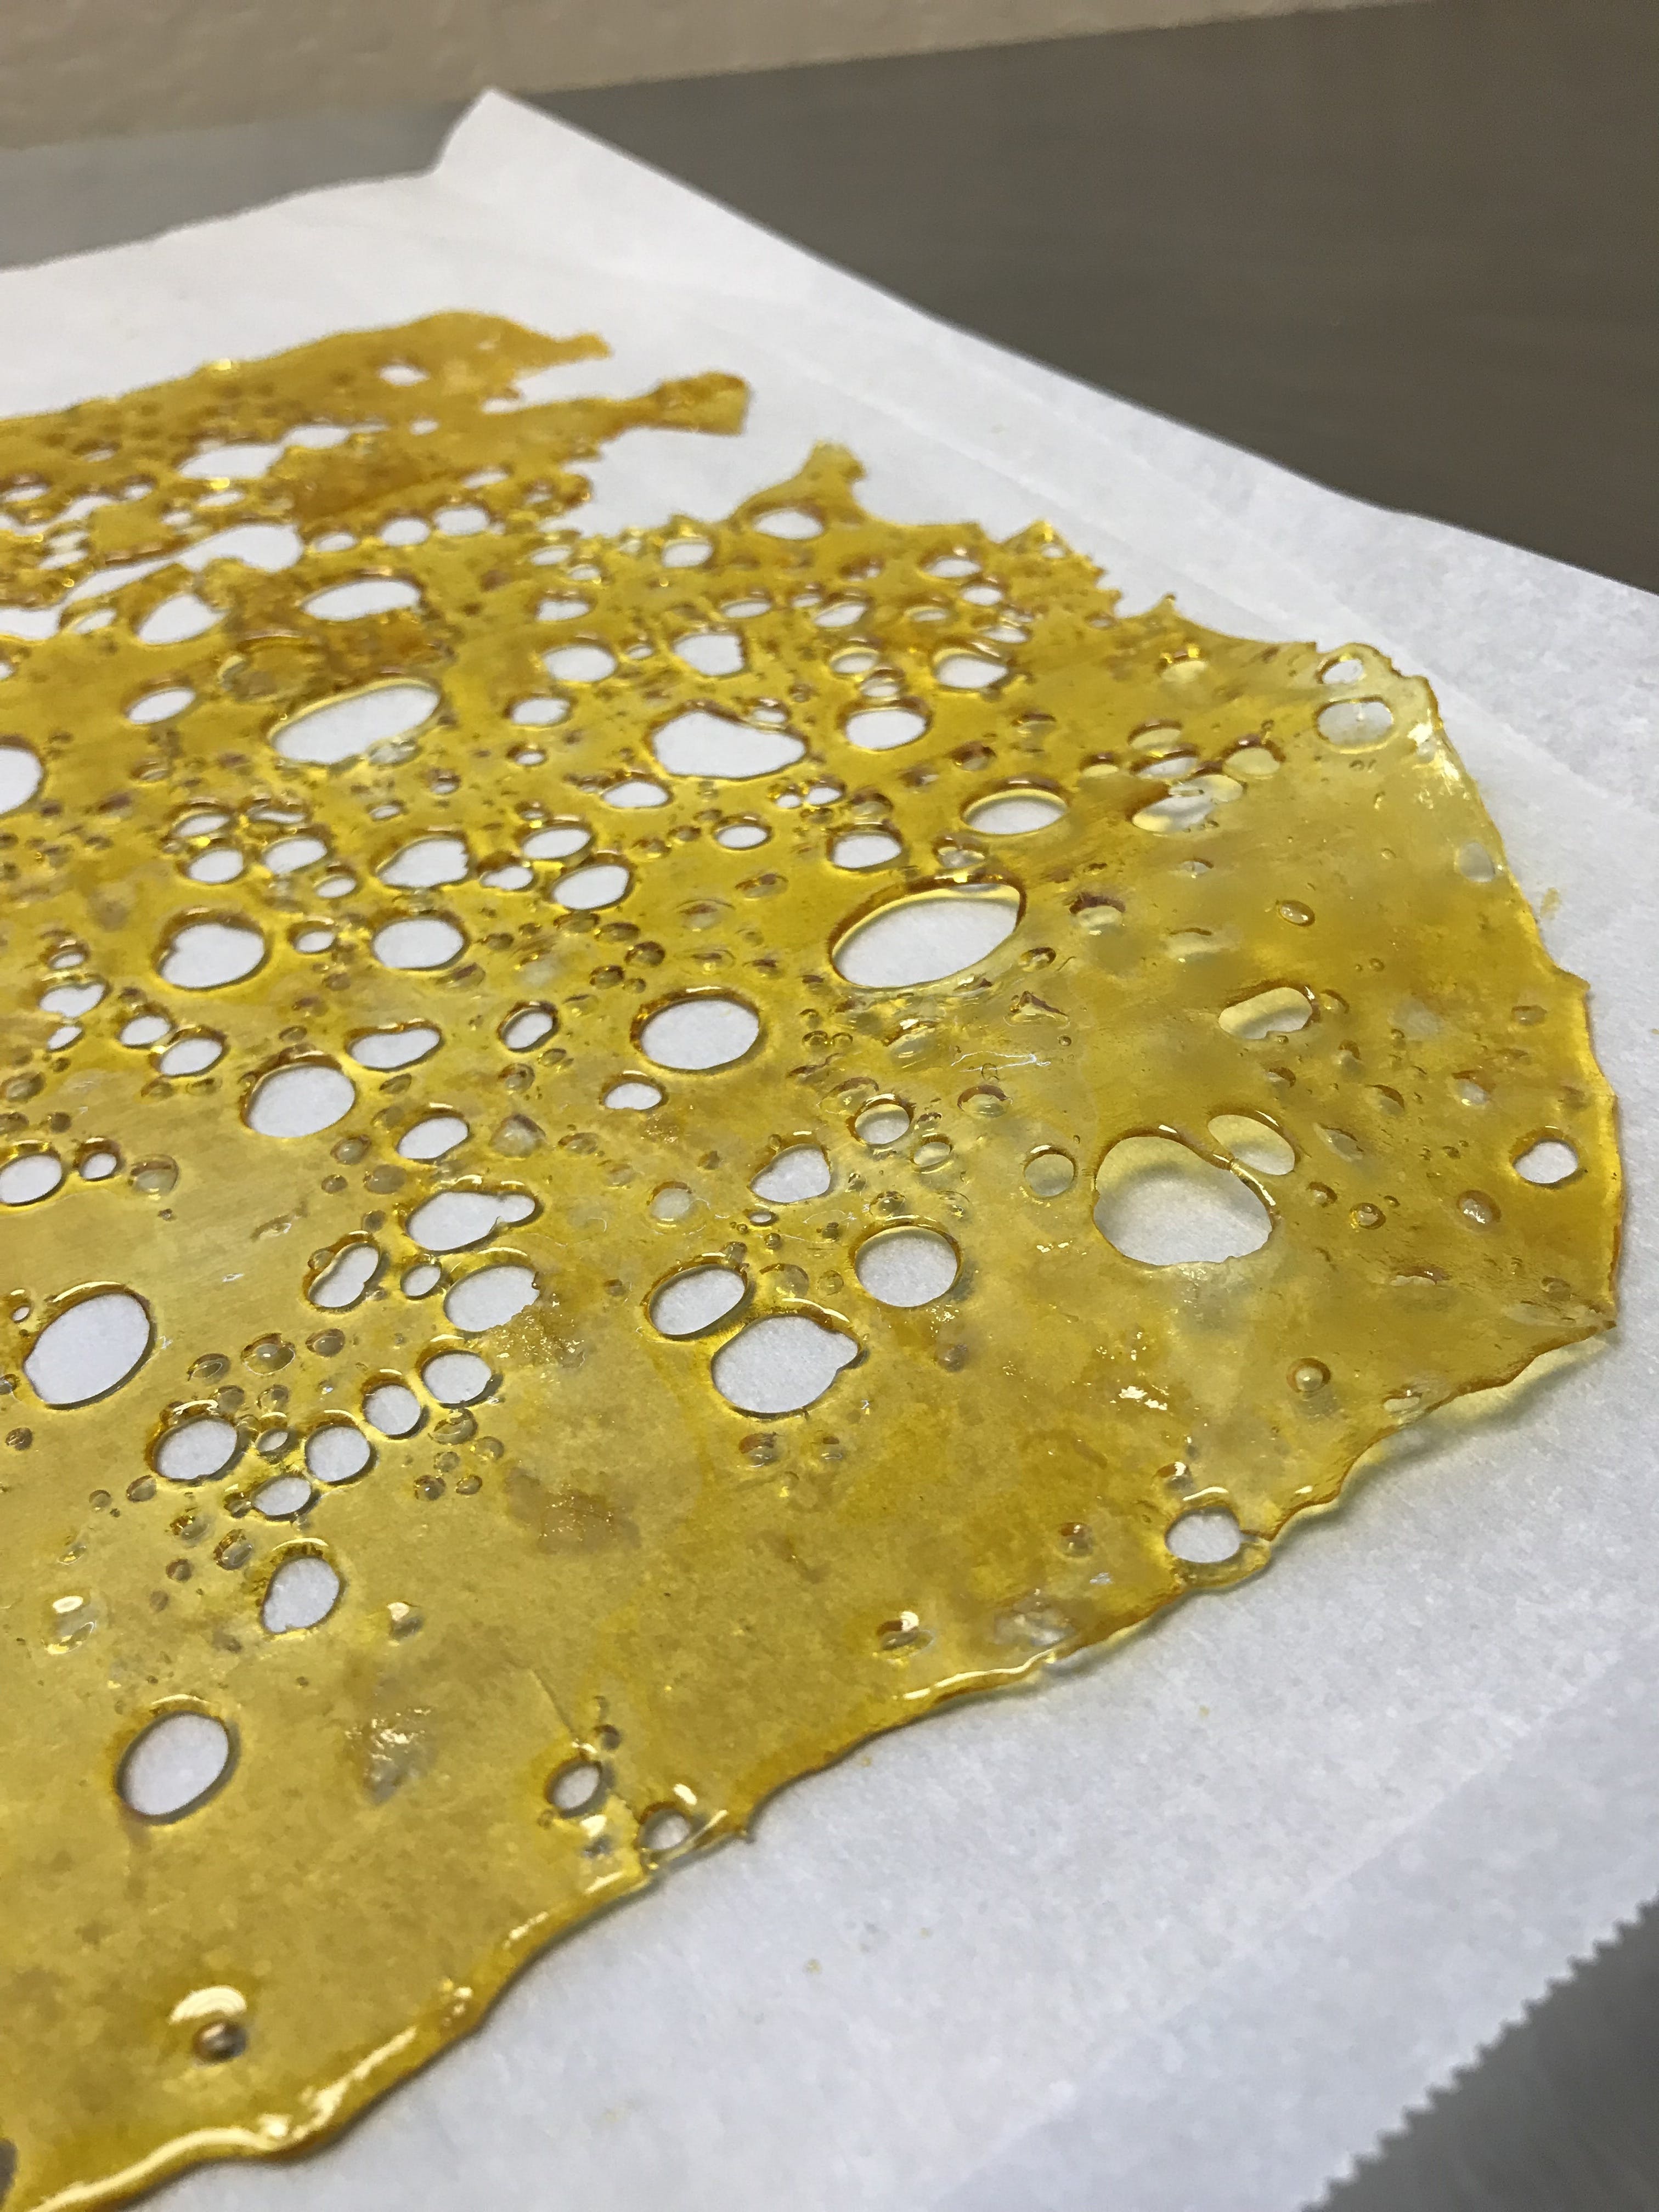 wax-sweet-science-live-resin-shatter-chem-234